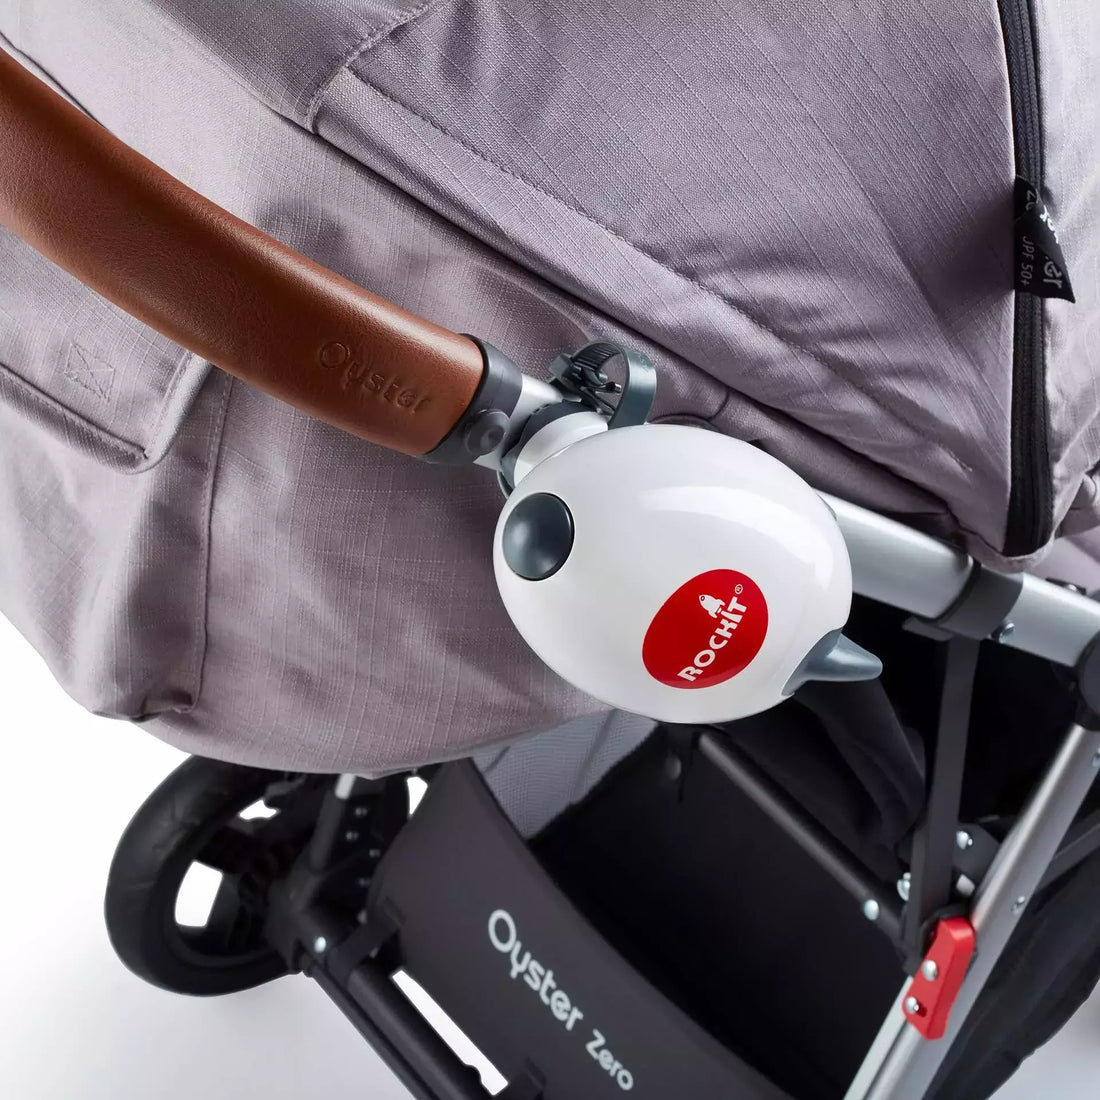 Rockit portable stroller rocker review - An easy way to soothe a